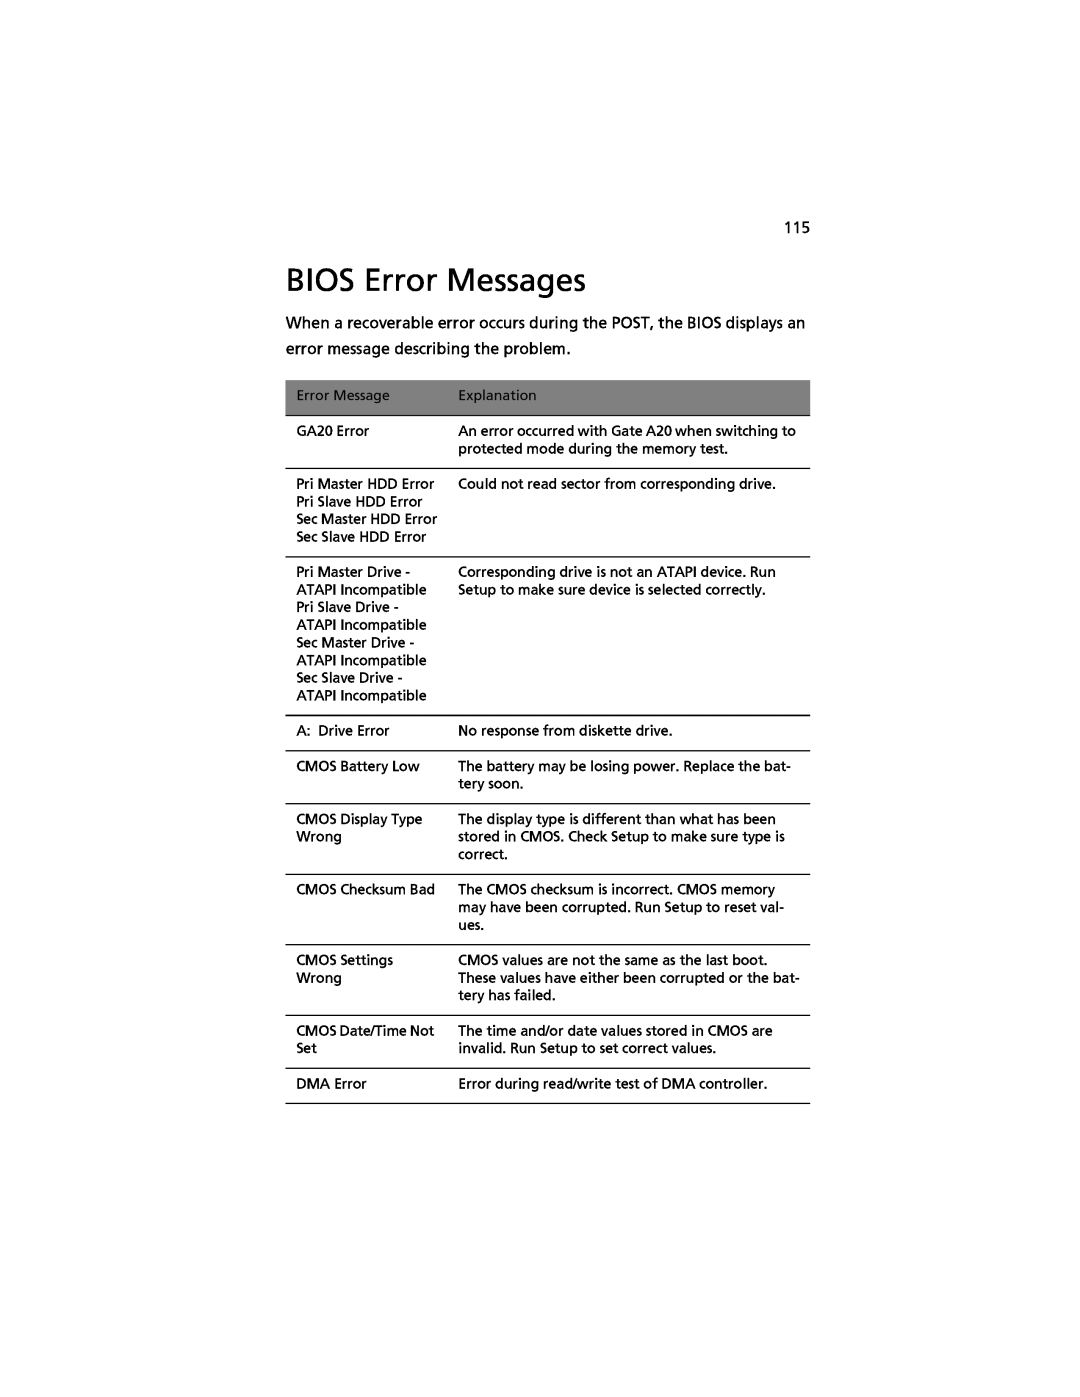 Acer G520 series manual BIOS Error Messages 